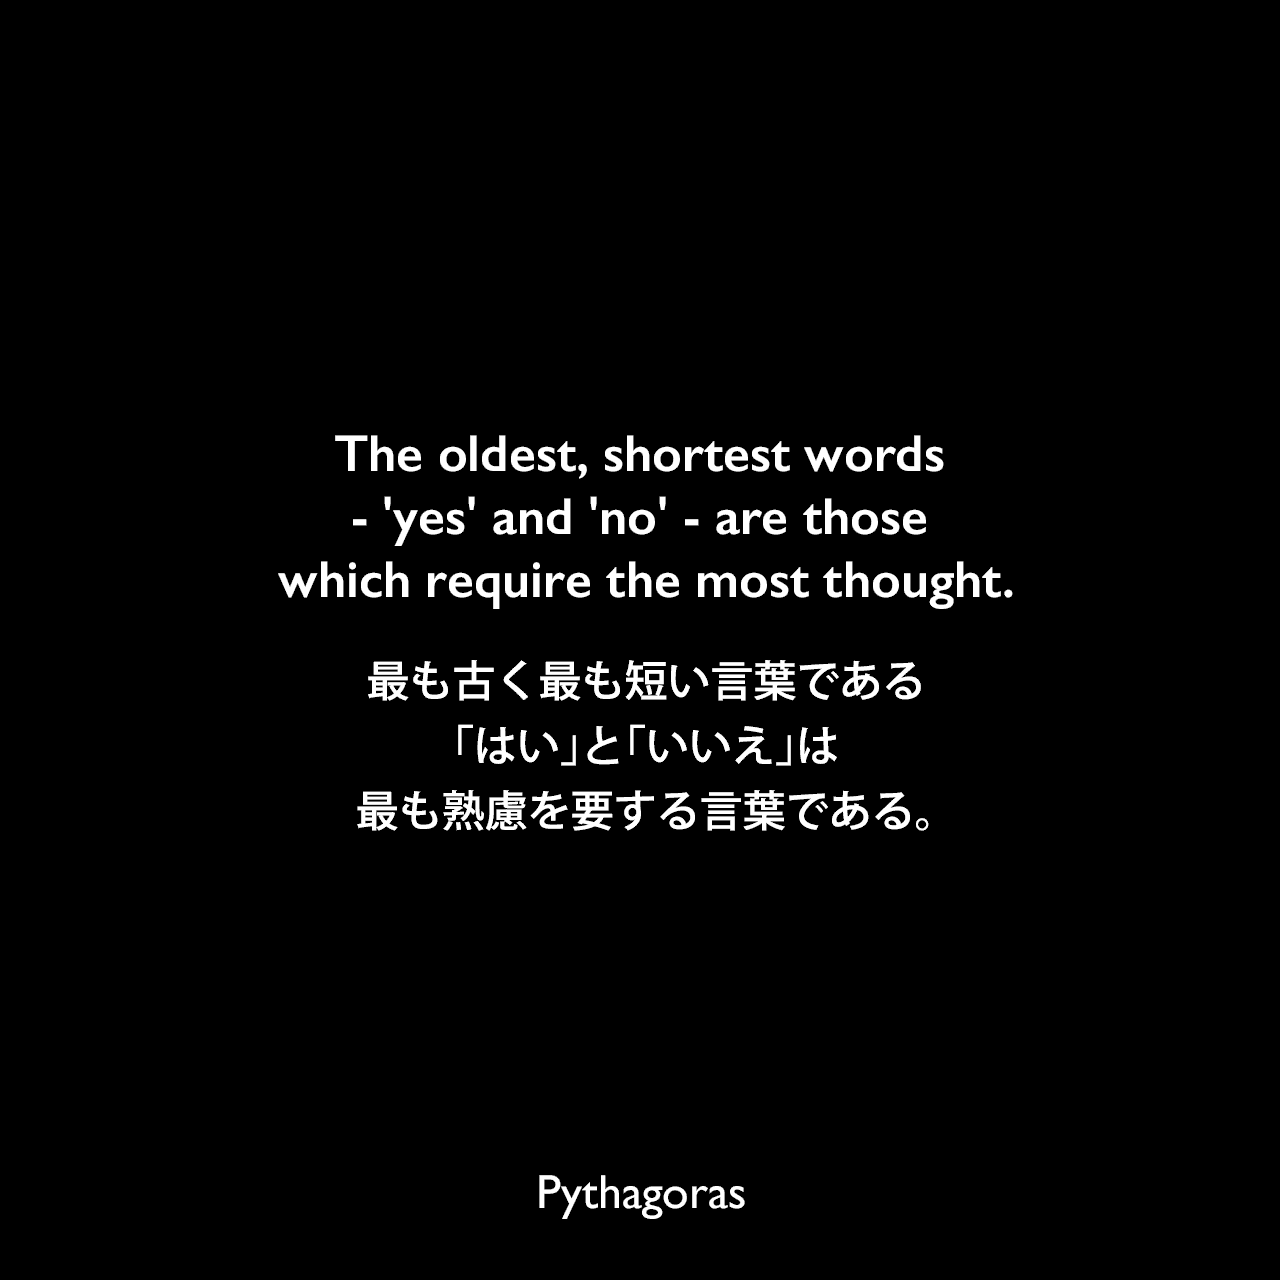 The oldest, shortest words - 'yes' and 'no' - are those which require the most thought.最も古く最も短い言葉である、「はい」と「いいえ」は、最も熟慮を要する言葉である。- Vera Kaikobadの本「Numerology for Relationships: A Guide to Birth Numbers」よりPythagoras